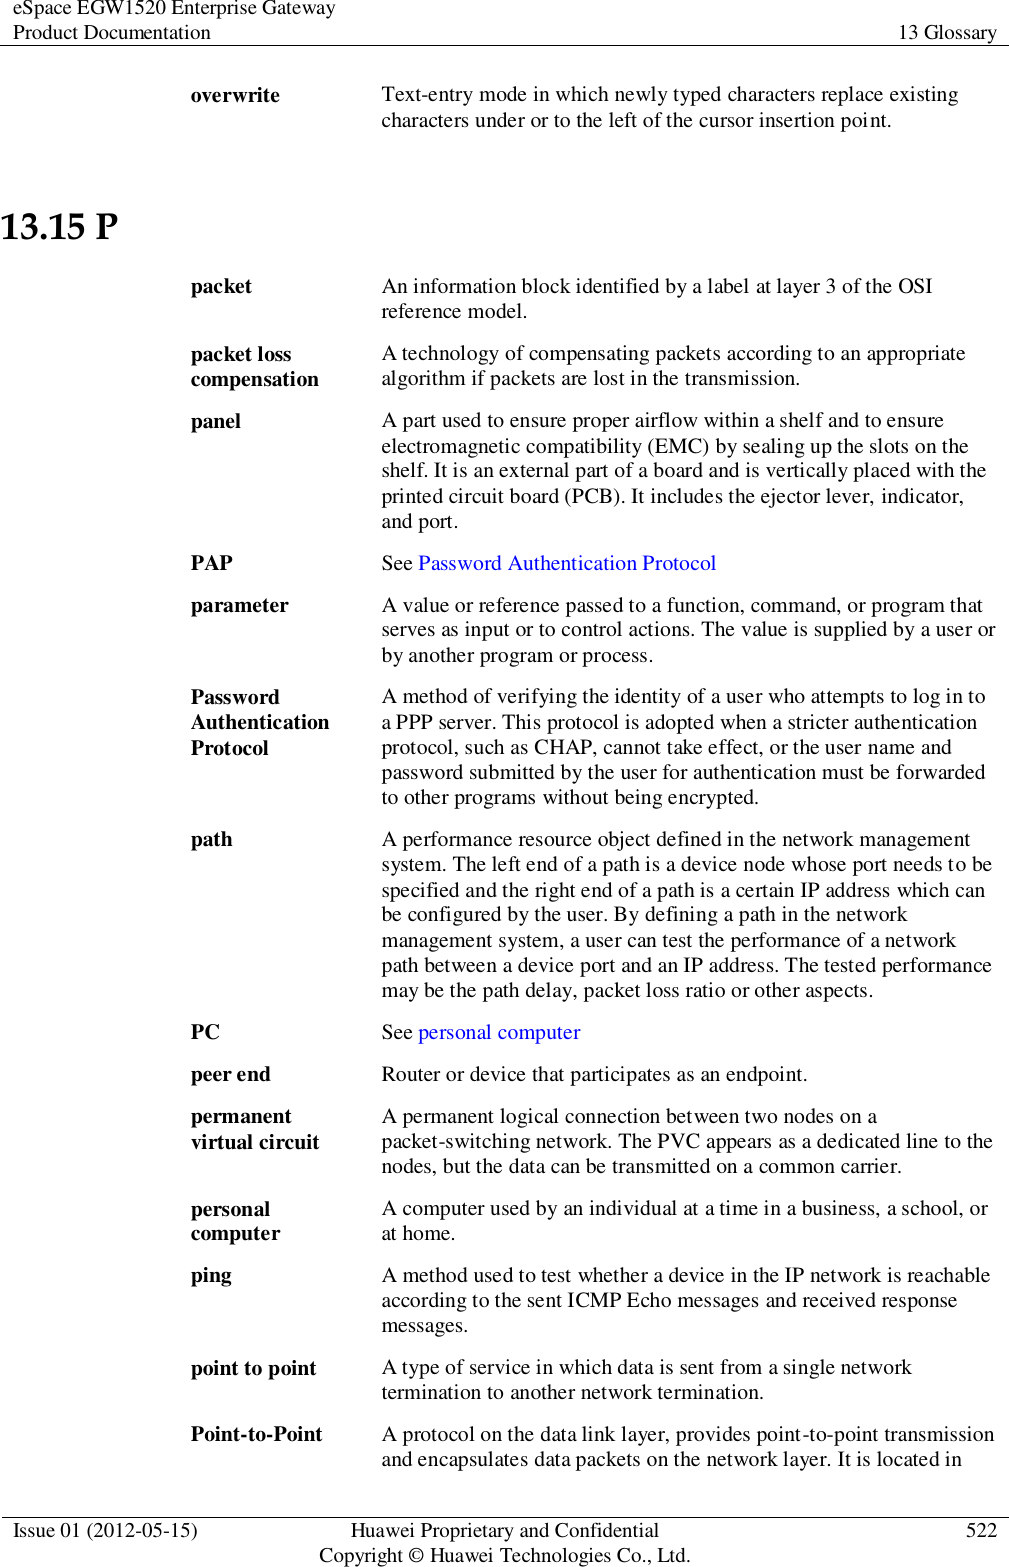 eSpace EGW1520 Enterprise Gateway Product Documentation 13 Glossary  Issue 01 (2012-05-15) Huawei Proprietary and Confidential                                     Copyright © Huawei Technologies Co., Ltd. 522  overwrite Text-entry mode in which newly typed characters replace existing characters under or to the left of the cursor insertion point. 13.15 P packet An information block identified by a label at layer 3 of the OSI reference model. packet loss compensation A technology of compensating packets according to an appropriate algorithm if packets are lost in the transmission. panel A part used to ensure proper airflow within a shelf and to ensure electromagnetic compatibility (EMC) by sealing up the slots on the shelf. It is an external part of a board and is vertically placed with the printed circuit board (PCB). It includes the ejector lever, indicator, and port. PAP See Password Authentication Protocol parameter A value or reference passed to a function, command, or program that serves as input or to control actions. The value is supplied by a user or by another program or process. Password Authentication Protocol A method of verifying the identity of a user who attempts to log in to a PPP server. This protocol is adopted when a stricter authentication protocol, such as CHAP, cannot take effect, or the user name and password submitted by the user for authentication must be forwarded to other programs without being encrypted. path A performance resource object defined in the network management system. The left end of a path is a device node whose port needs to be specified and the right end of a path is a certain IP address which can be configured by the user. By defining a path in the network management system, a user can test the performance of a network path between a device port and an IP address. The tested performance may be the path delay, packet loss ratio or other aspects. PC See personal computer peer end Router or device that participates as an endpoint. permanent virtual circuit A permanent logical connection between two nodes on a packet-switching network. The PVC appears as a dedicated line to the nodes, but the data can be transmitted on a common carrier. personal computer A computer used by an individual at a time in a business, a school, or at home. ping A method used to test whether a device in the IP network is reachable according to the sent ICMP Echo messages and received response messages. point to point A type of service in which data is sent from a single network termination to another network termination. Point-to-Point A protocol on the data link layer, provides point-to-point transmission and encapsulates data packets on the network layer. It is located in 